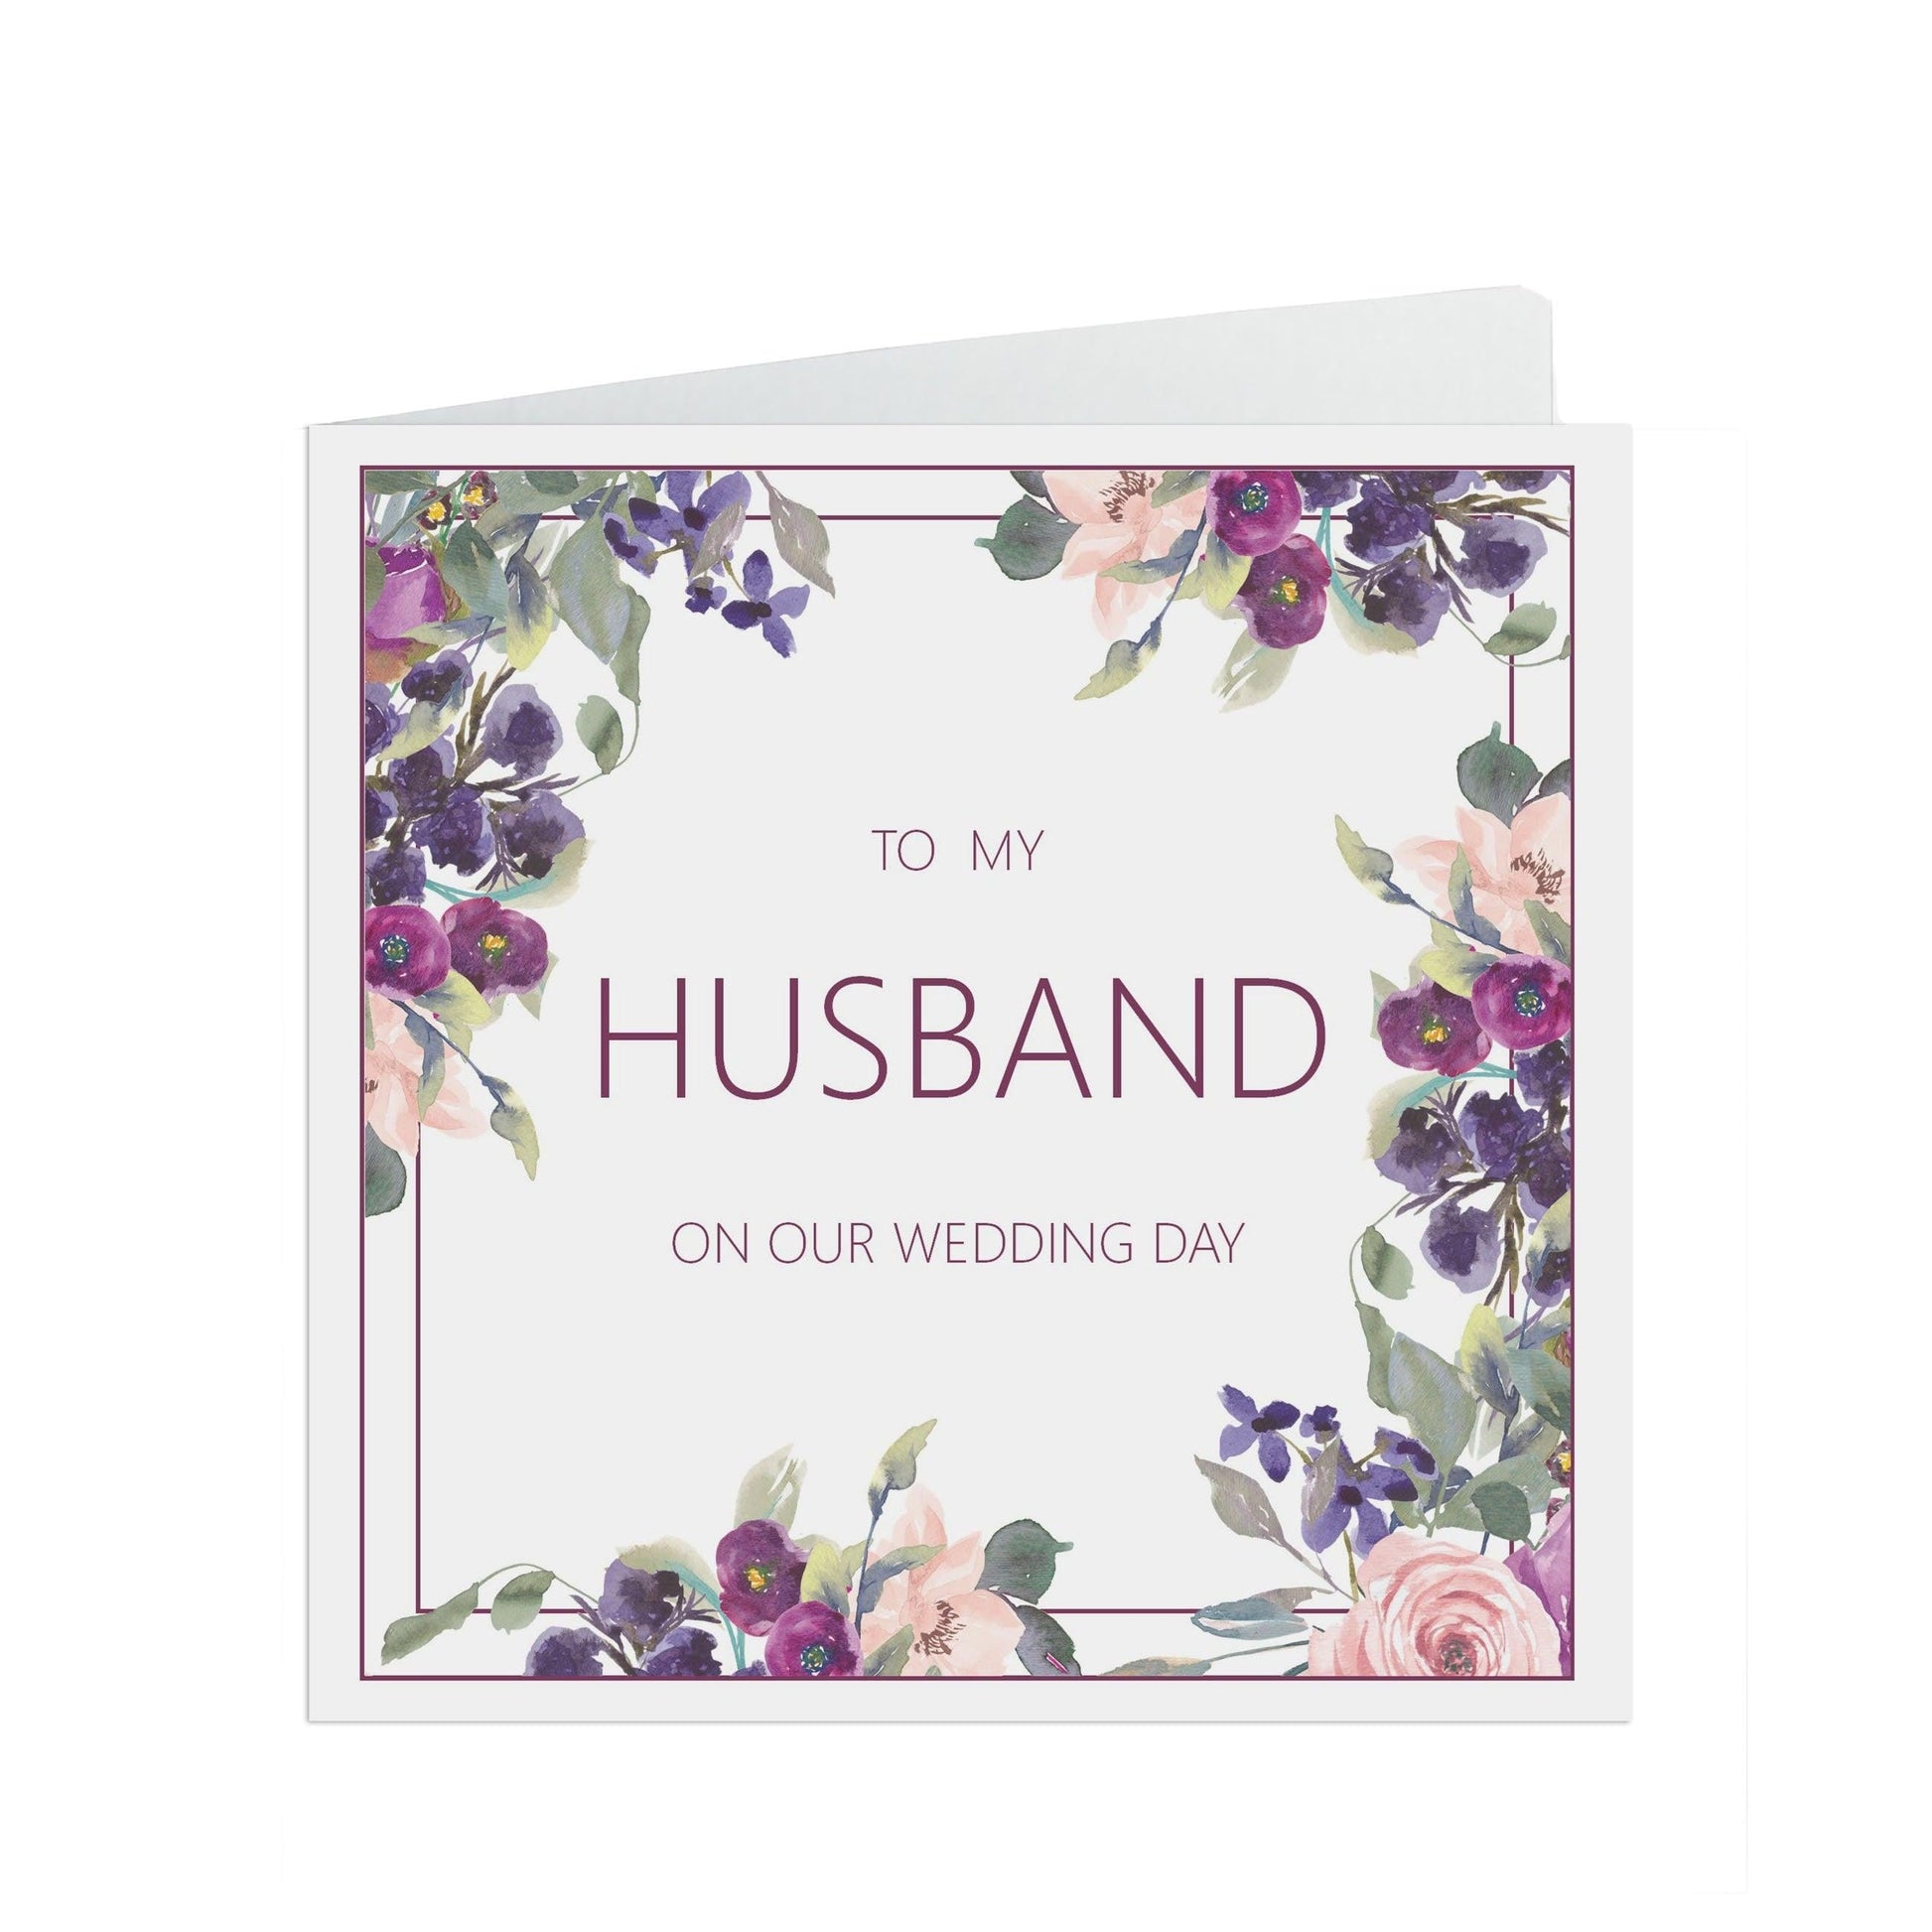  Husband Wedding Day Card, Purple Floral 6x6 Inches In Size With A Kraft Envelope by PMPRINTED 